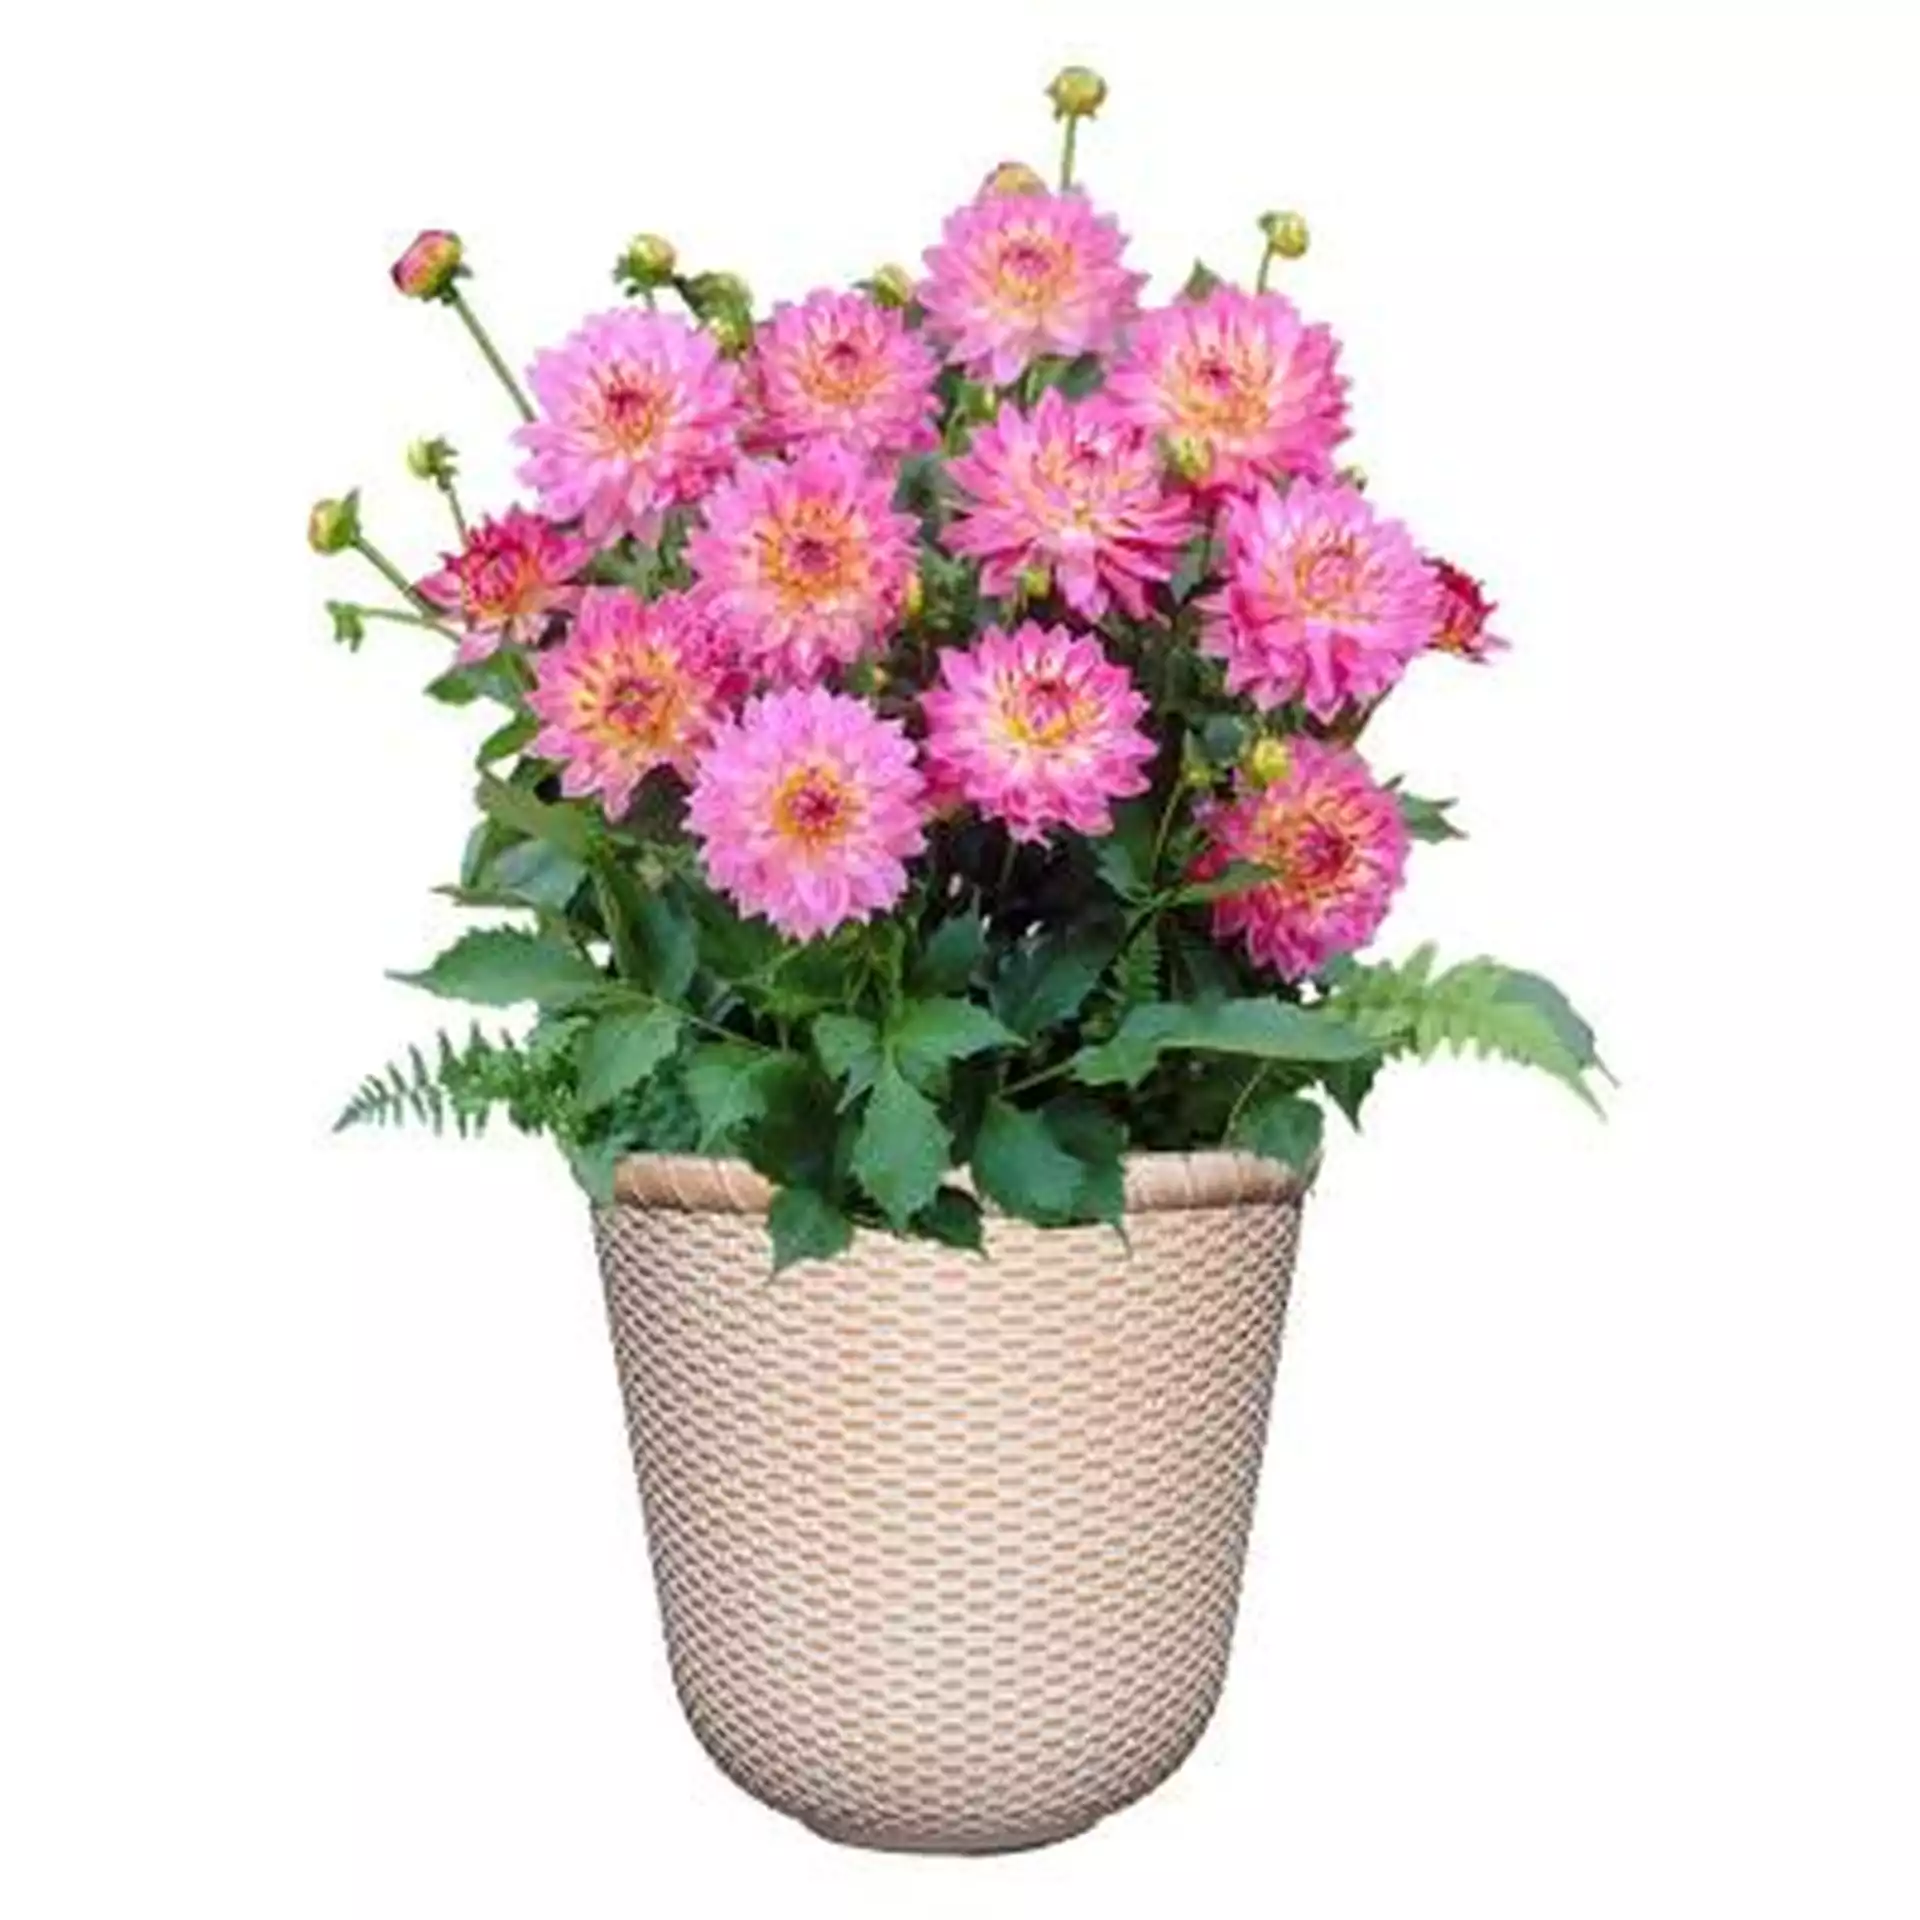 Classic Home & Garden Dahlia Grow Kit with 11 in. Eastlake Planter in Whitewash Finish